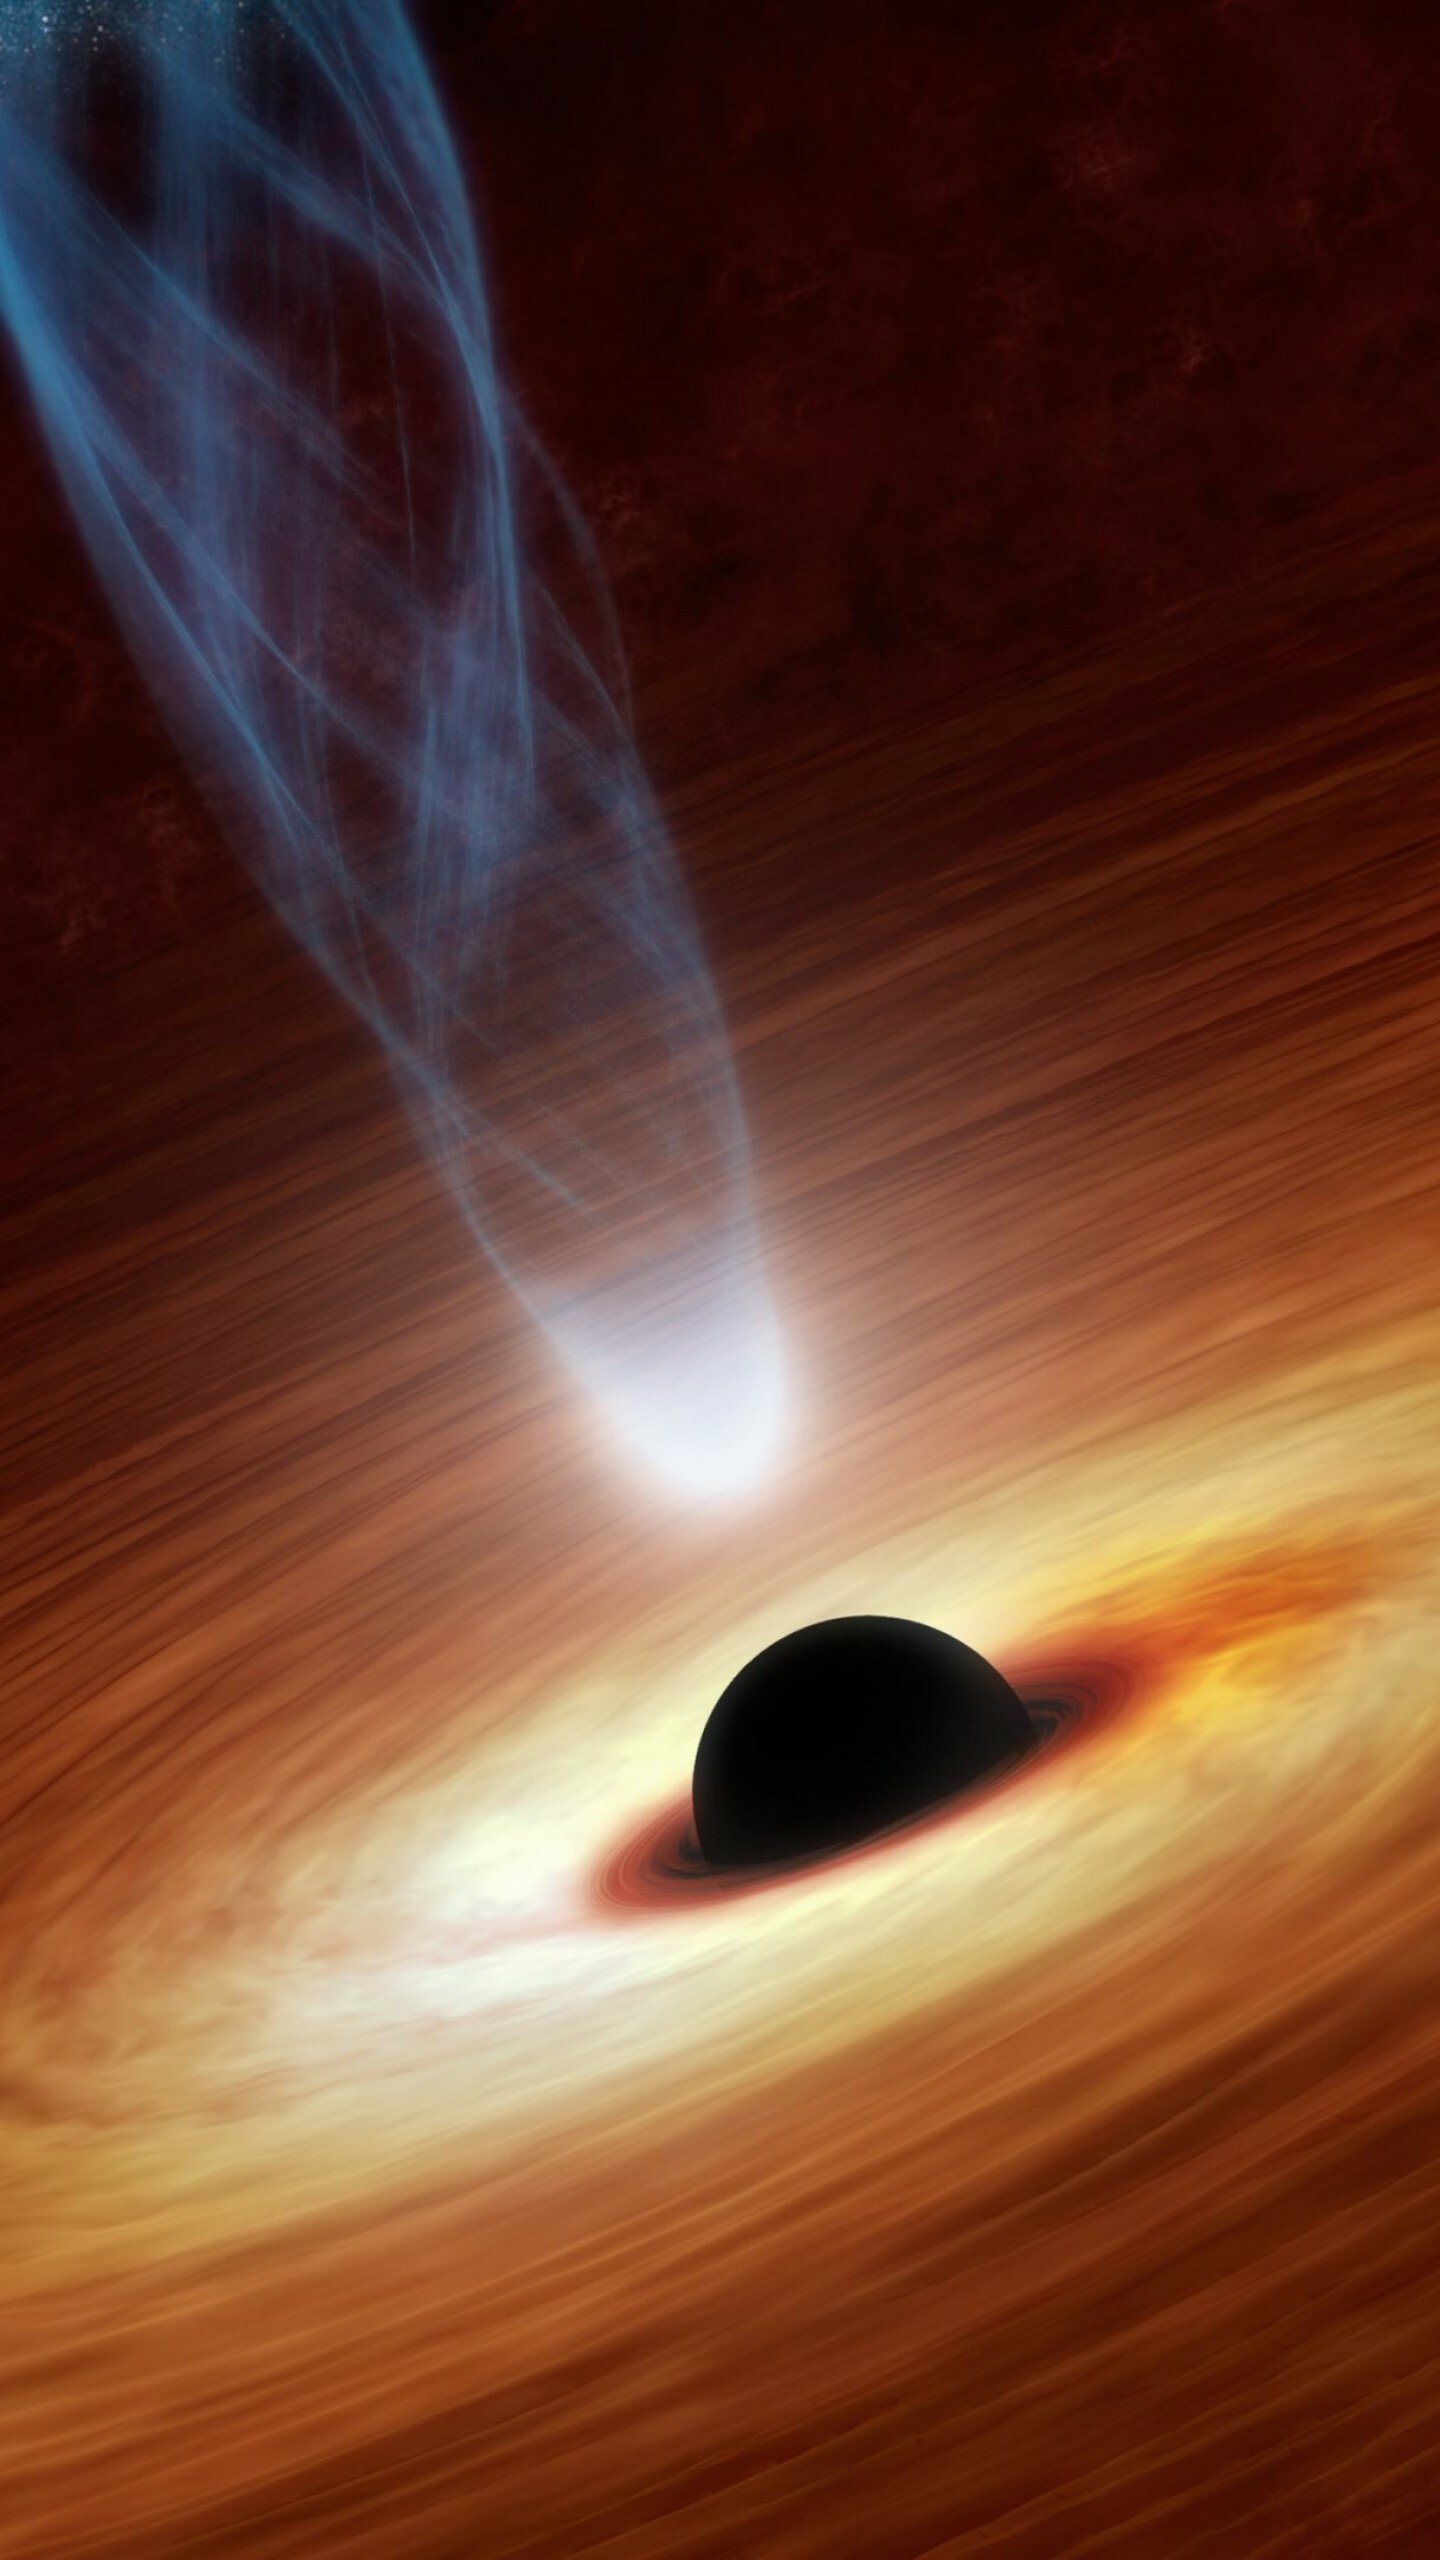 Black Hole: An object with a strong gravity, Space, Universe. 1440x2560 HD Wallpaper.